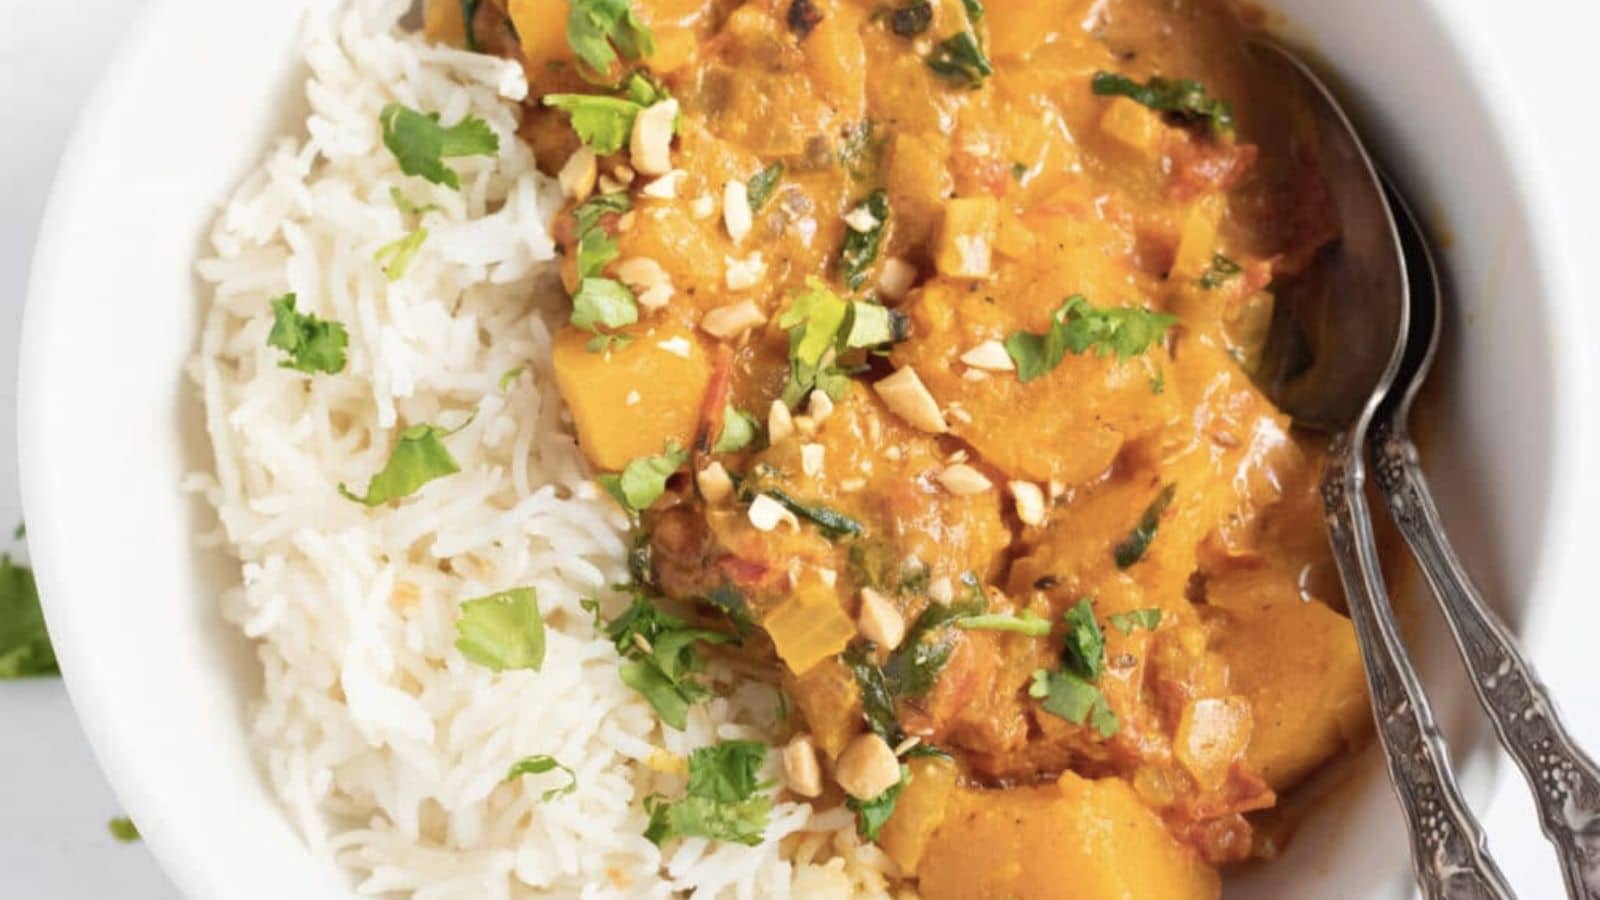 Butternut squash curry served with rice.
